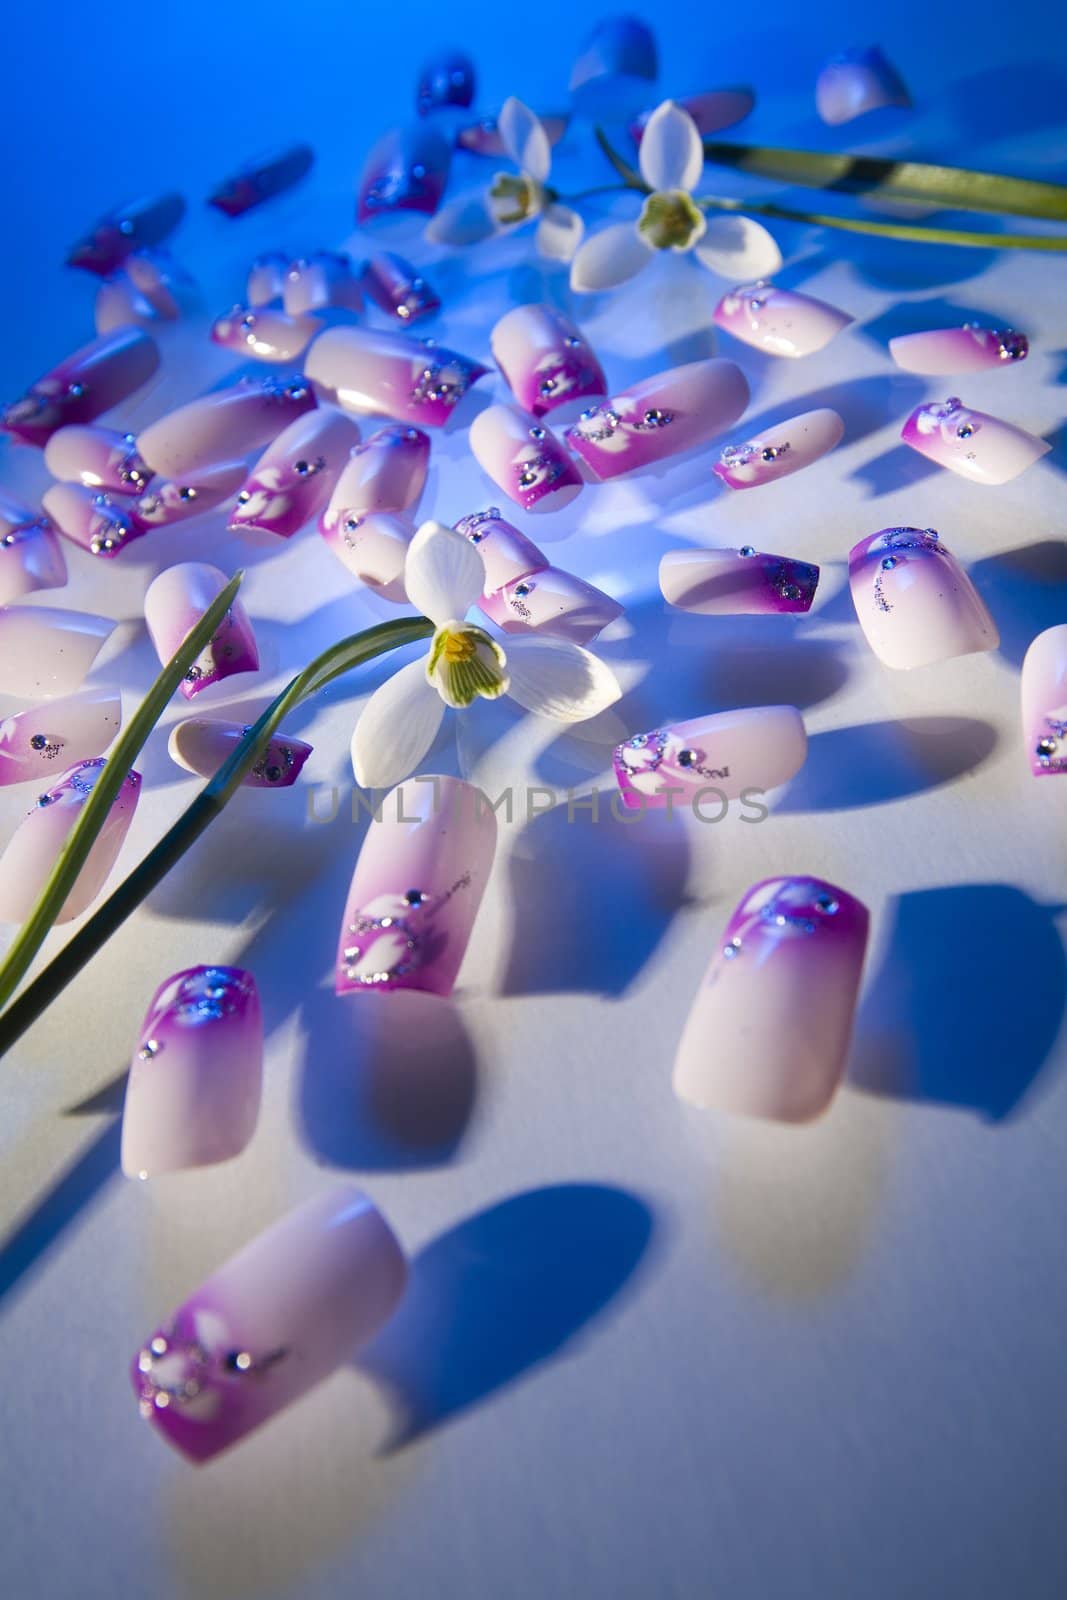 artificial nails on the table glass